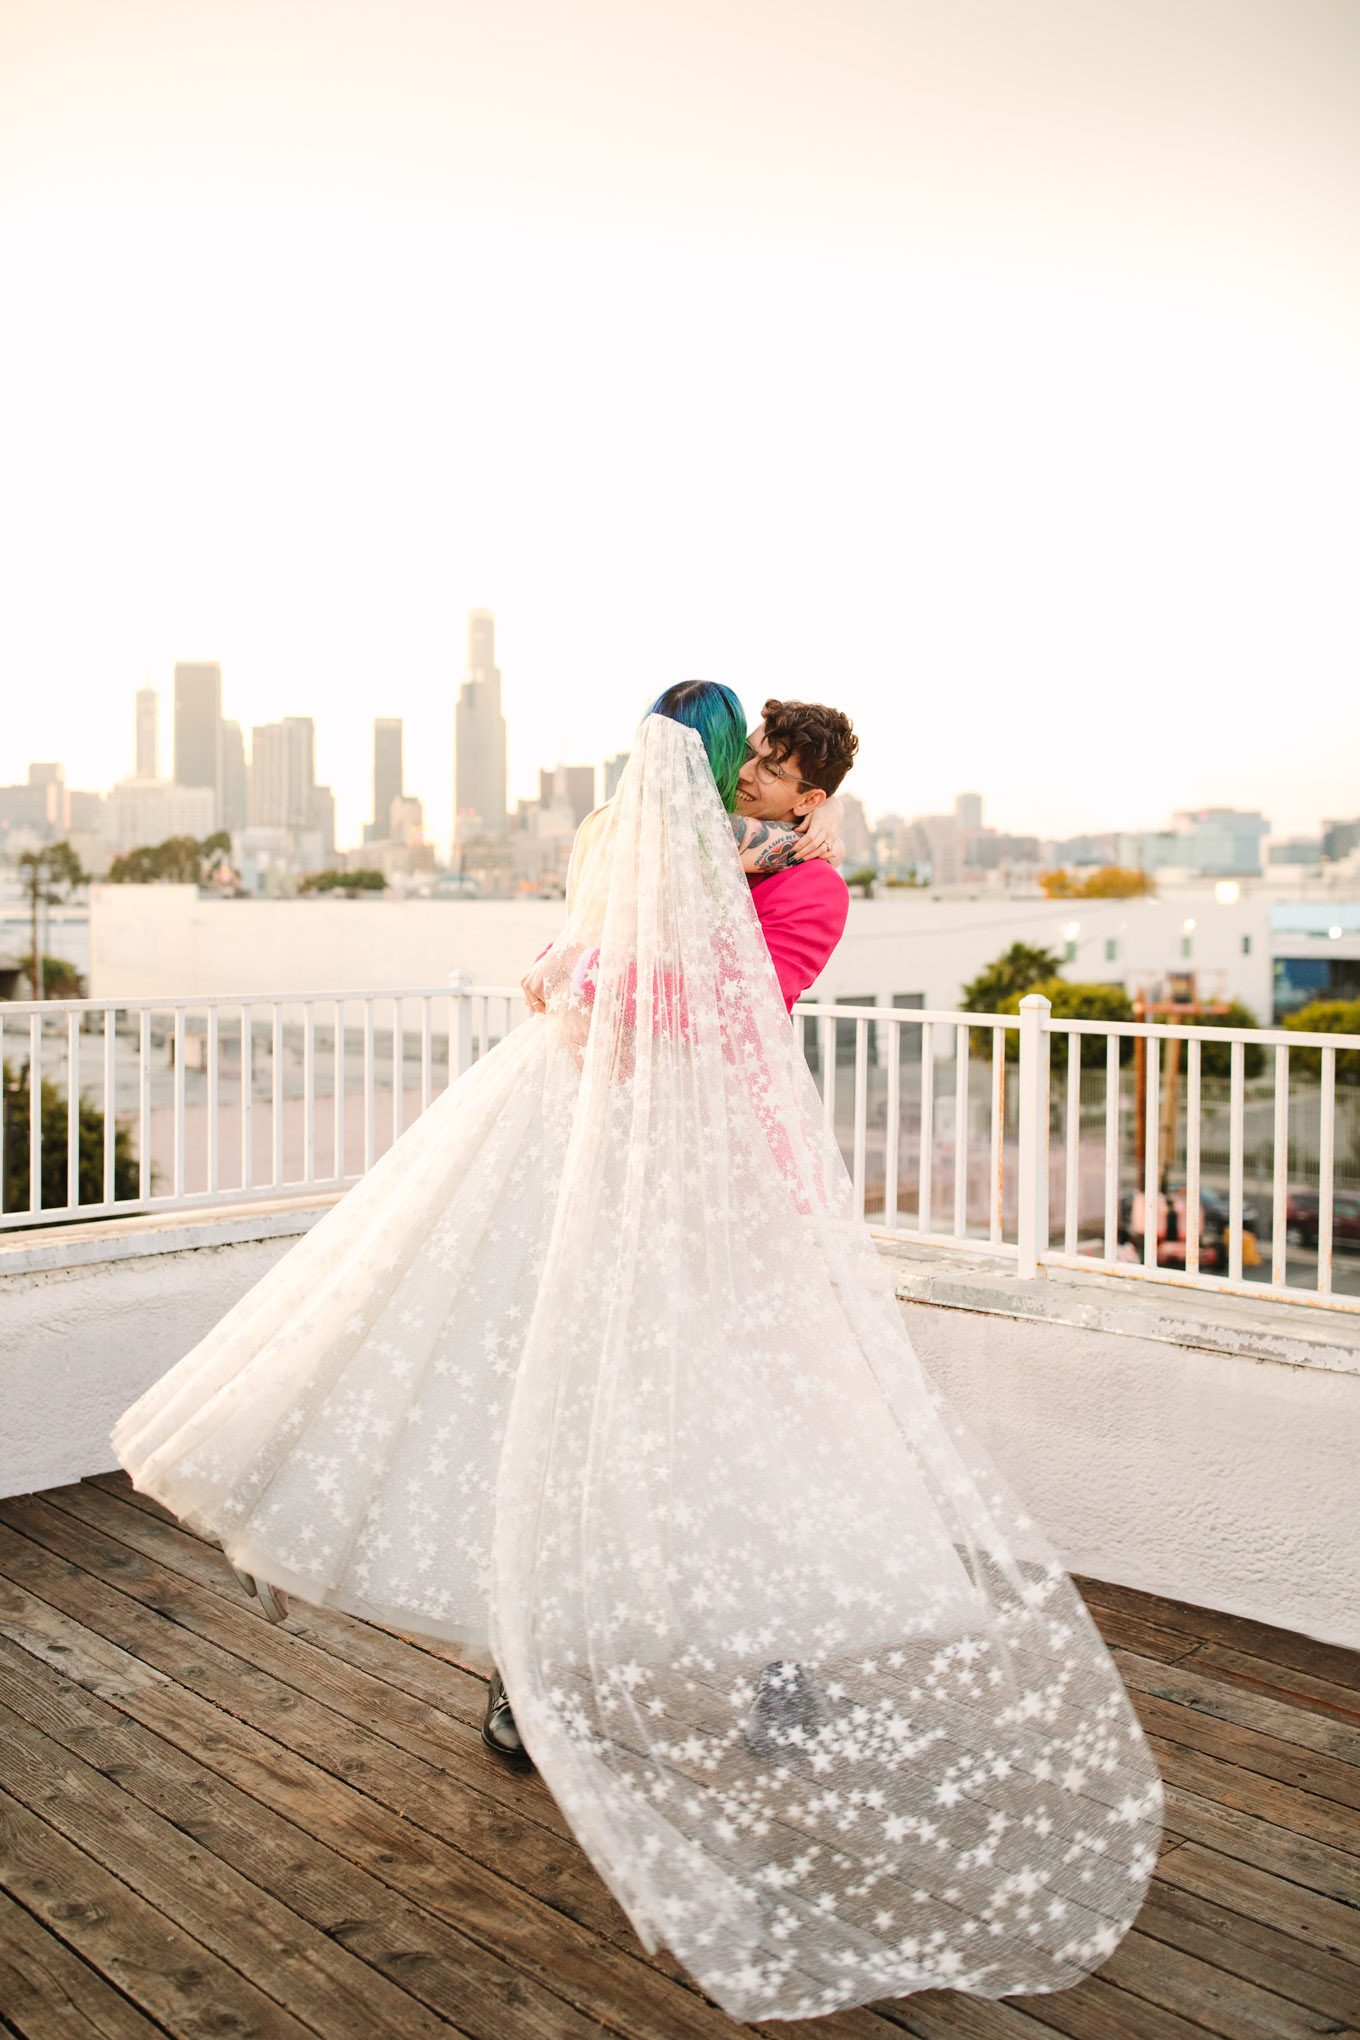 Bride with star veil and groom spinning on The Unique Space roof | Engagement, elopement, and wedding photography roundup of Mary Costa’s favorite images from 2020 | Colorful and elevated photography for fun-loving couples in Southern California | #2020wedding #elopement #weddingphoto #weddingphotography   Source: Mary Costa Photography | Los Angeles